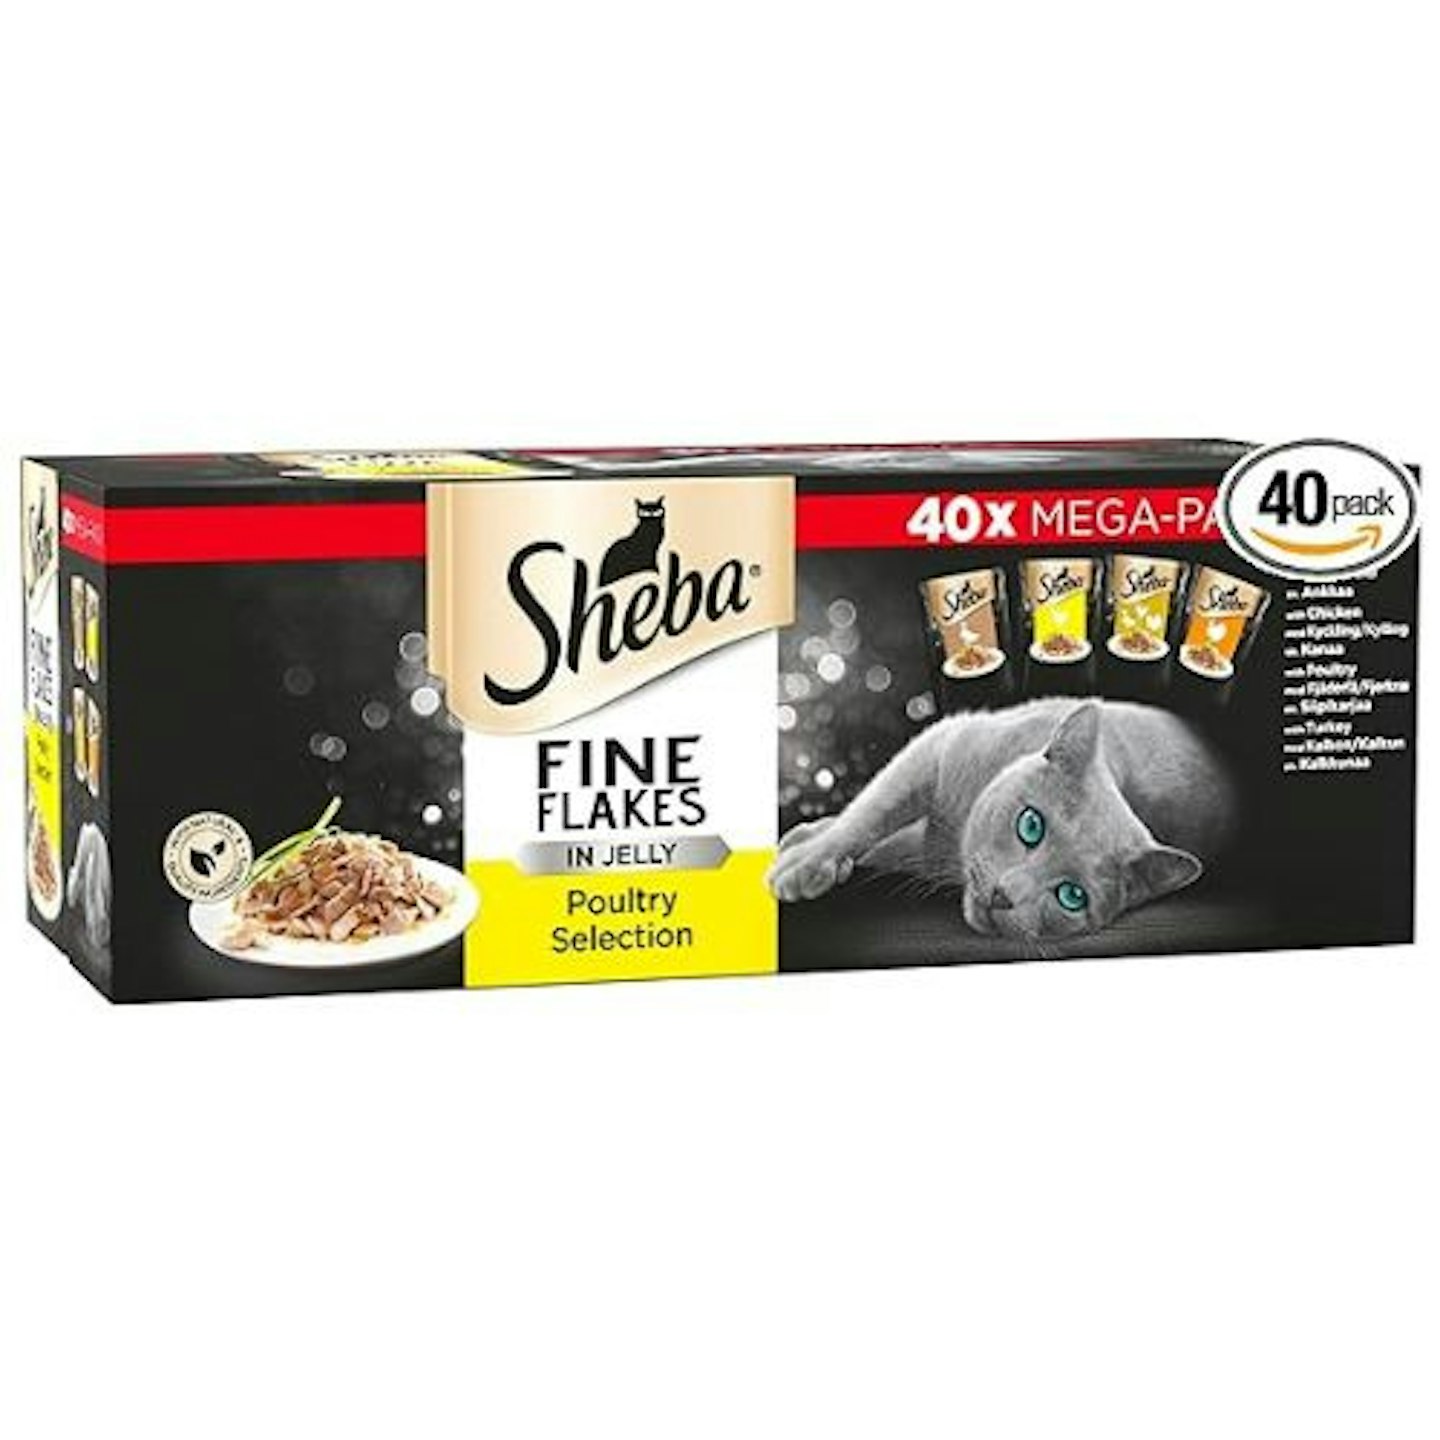 Sheba Fine Flakes Poultry Collection in Jelly 40 Pouches